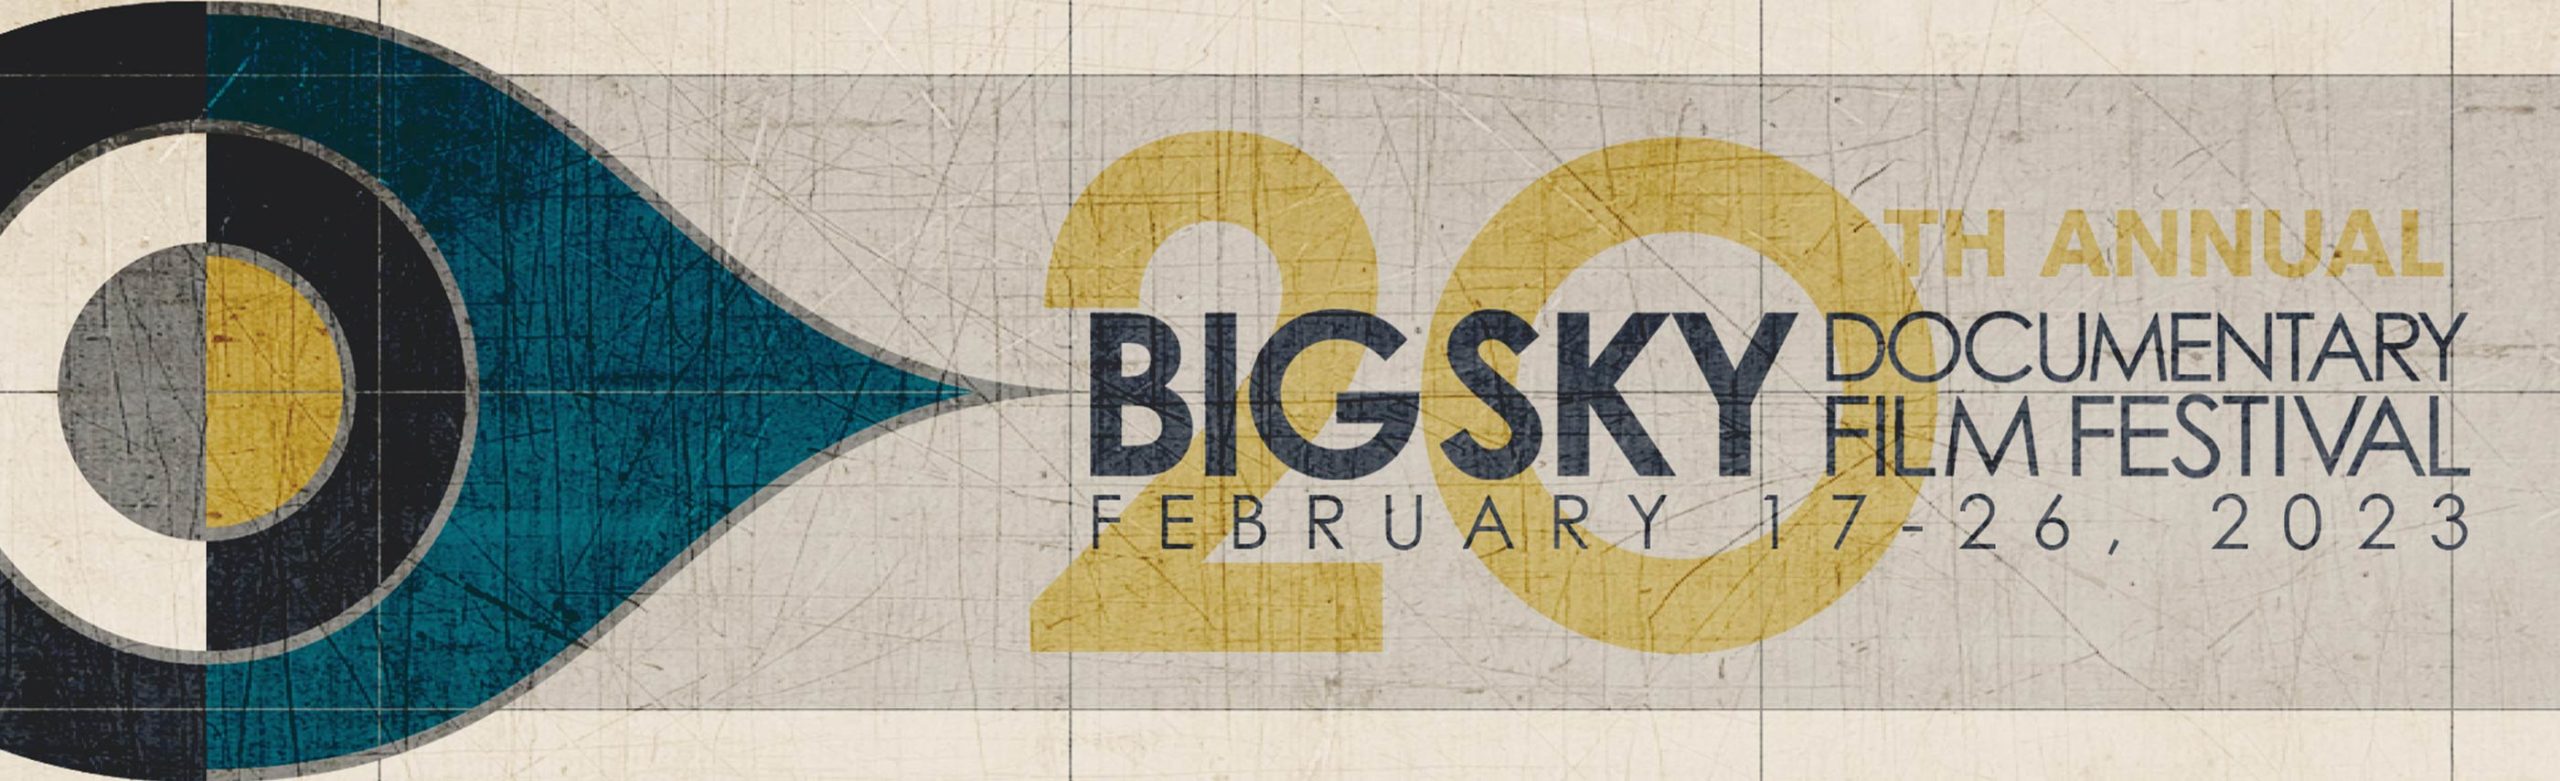 20th Annual Big Sky Documentary Film Festival Returns to The Wilma Image